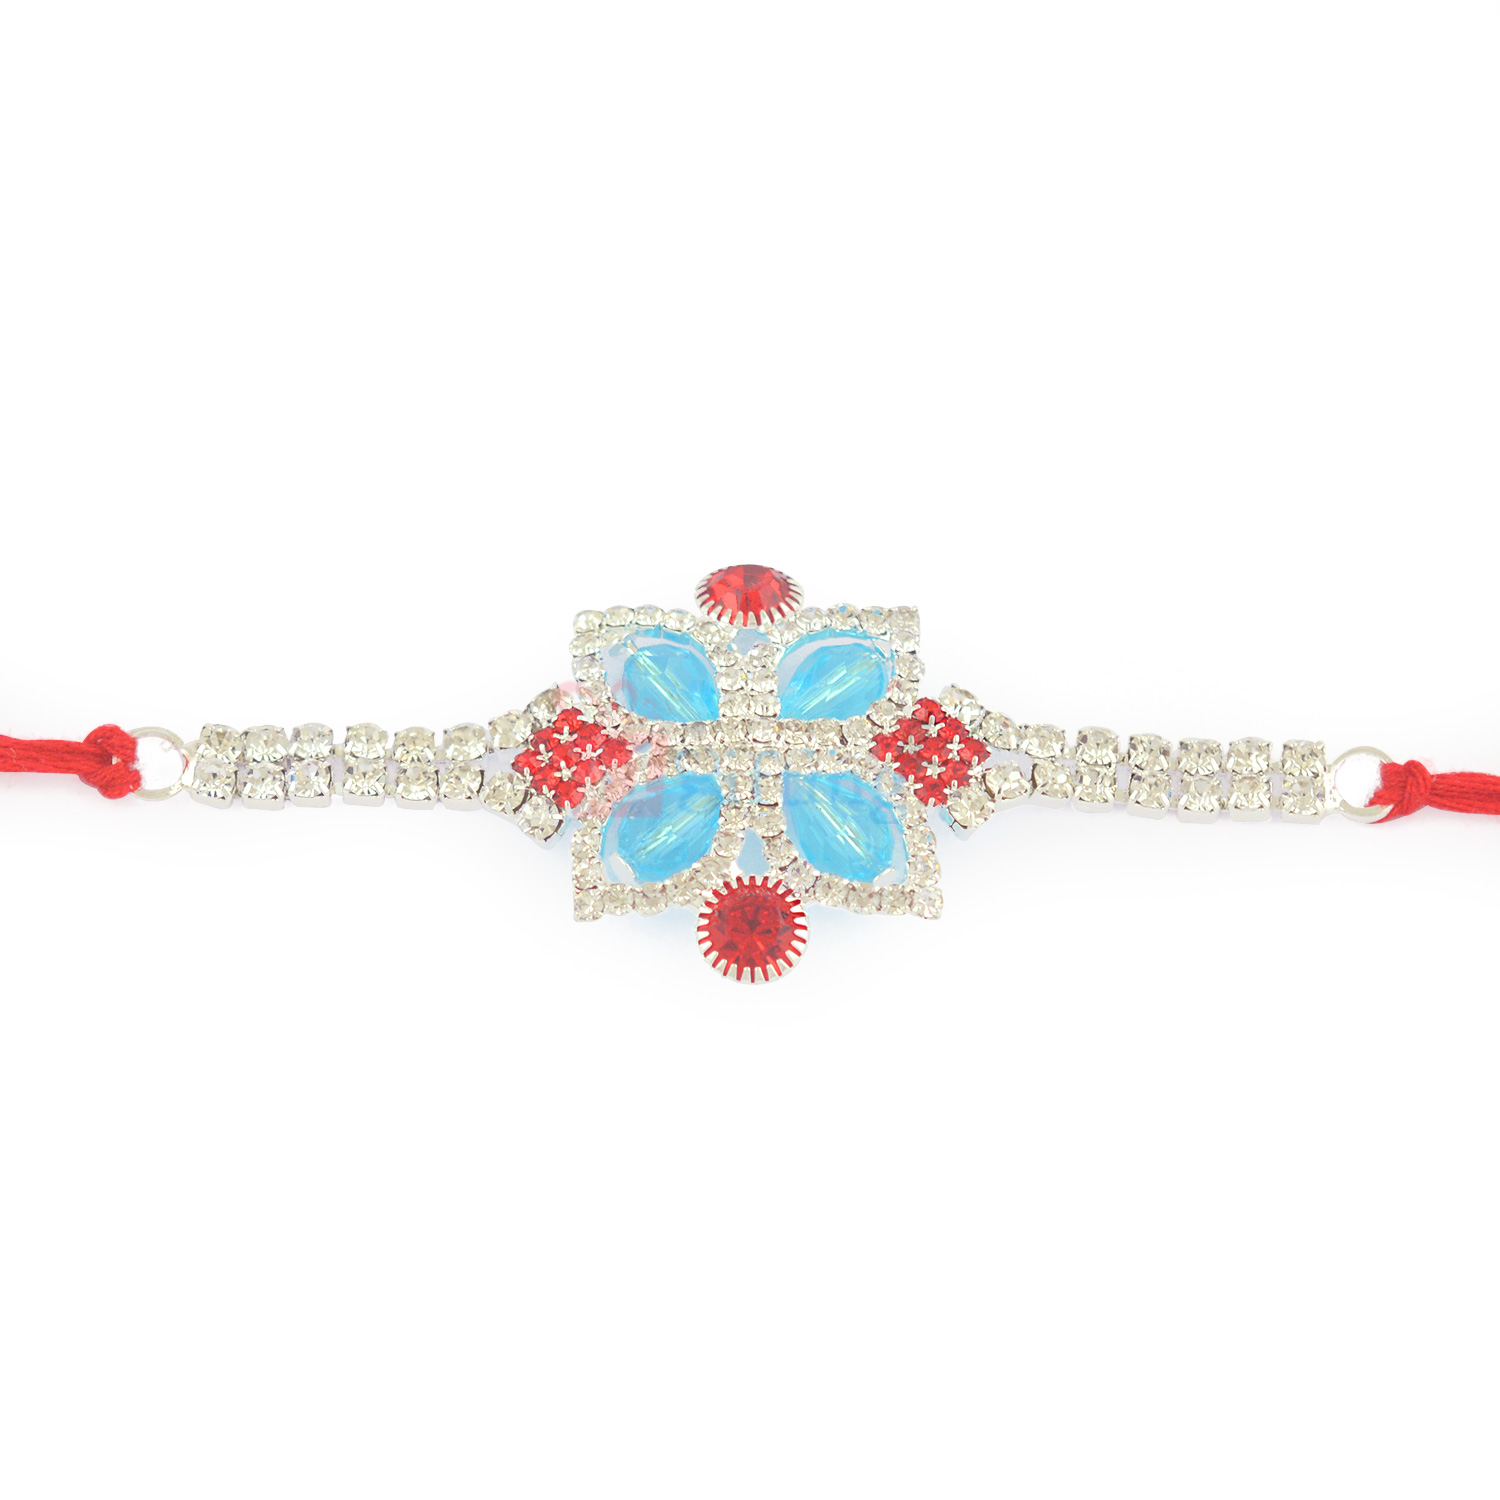 Marvellous Looking Jewel and Silver Combined Rakhi